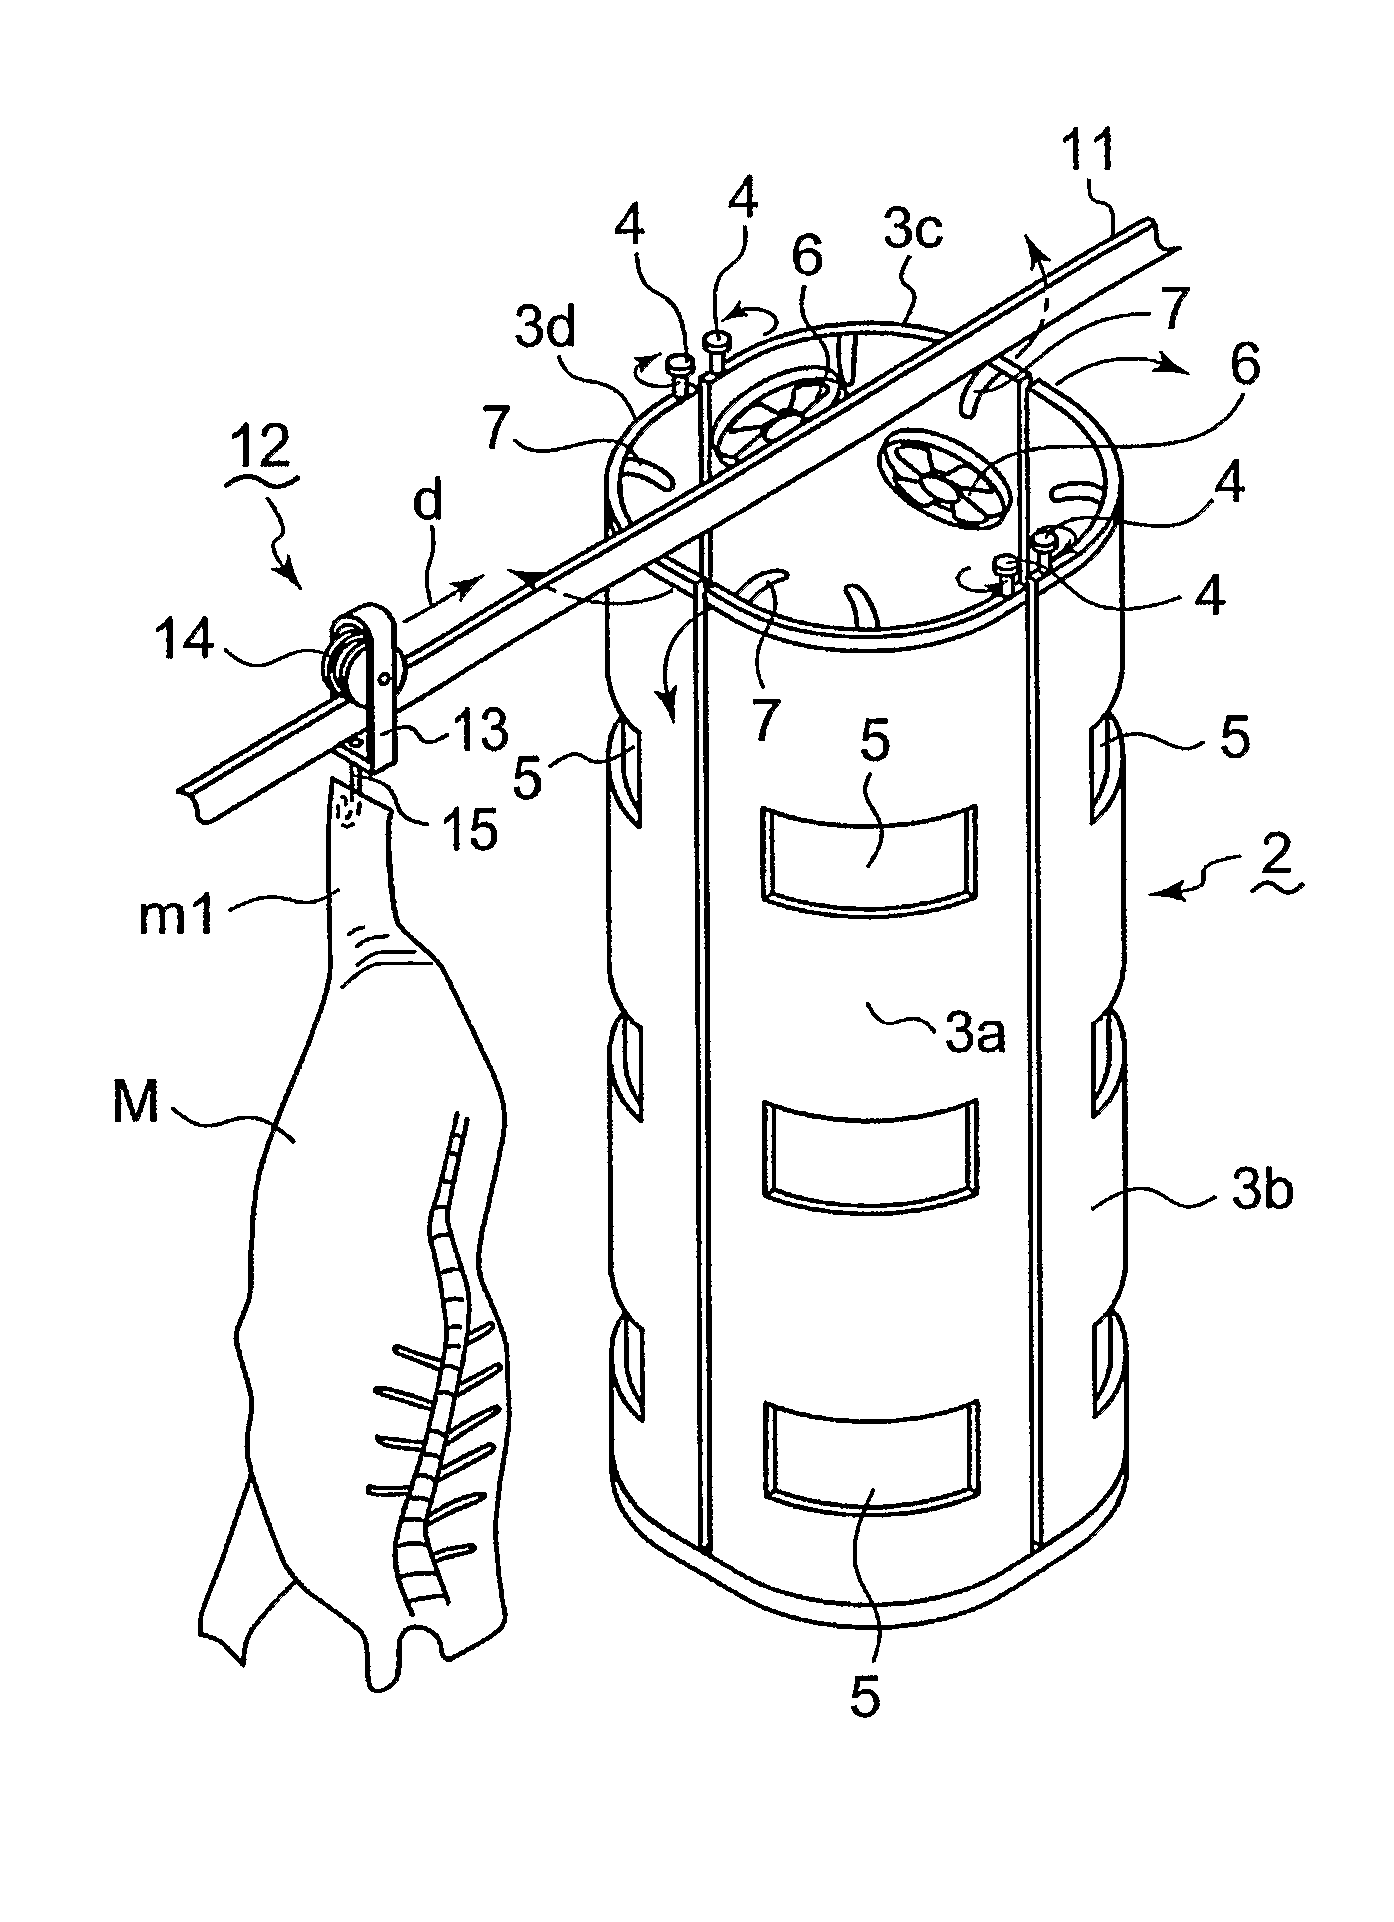 Method and System for Cooling of Dressed Carcasses